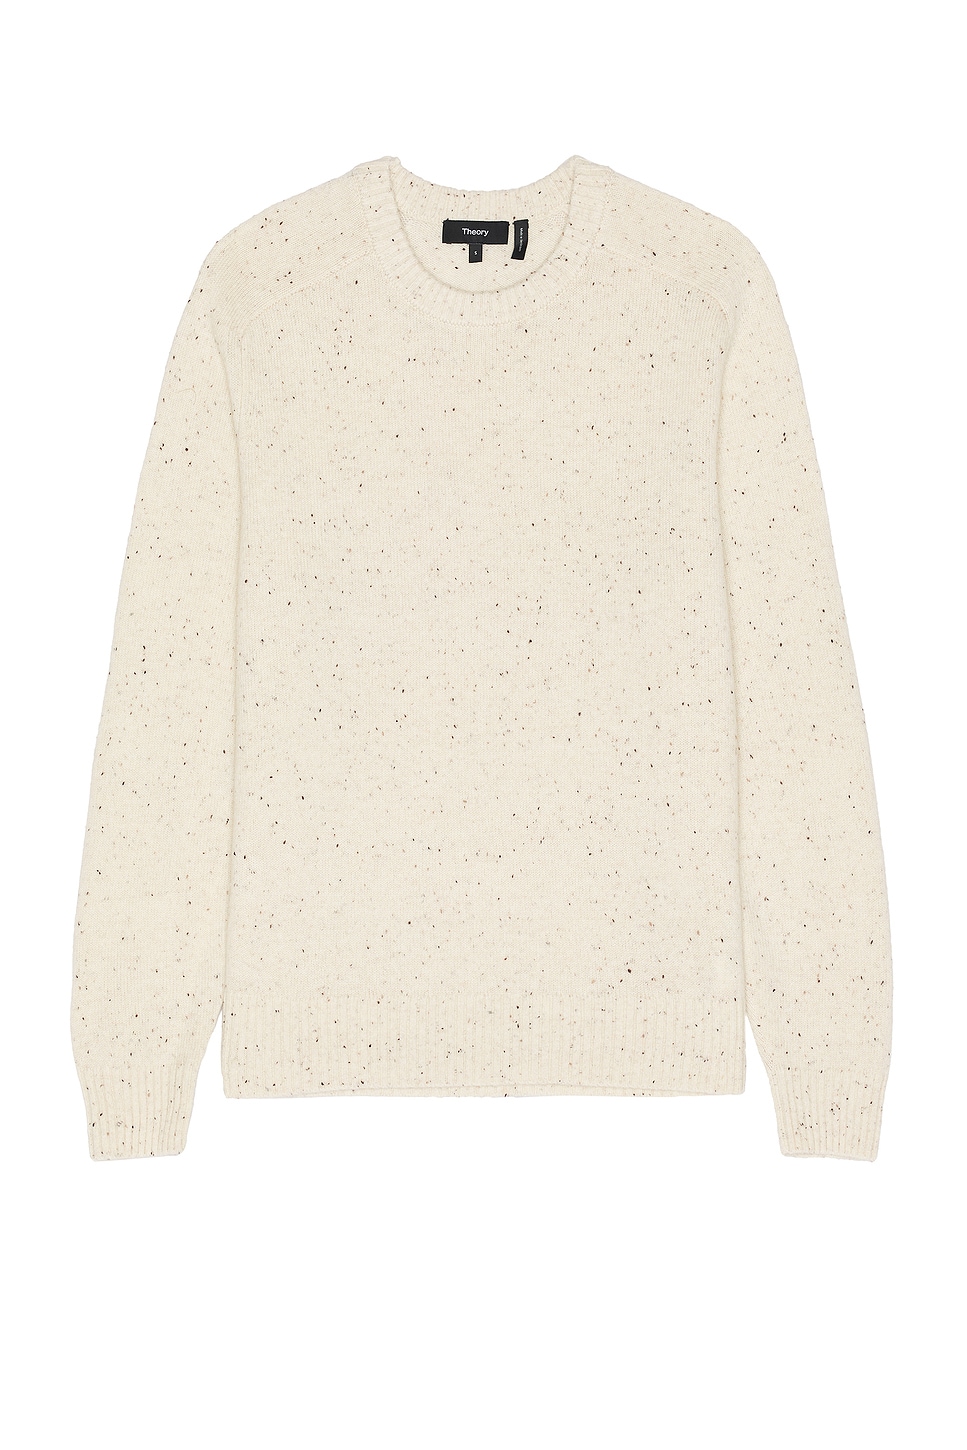 Image 1 of Theory Dinin Woolcash Donegal Sweater in Cream Multi